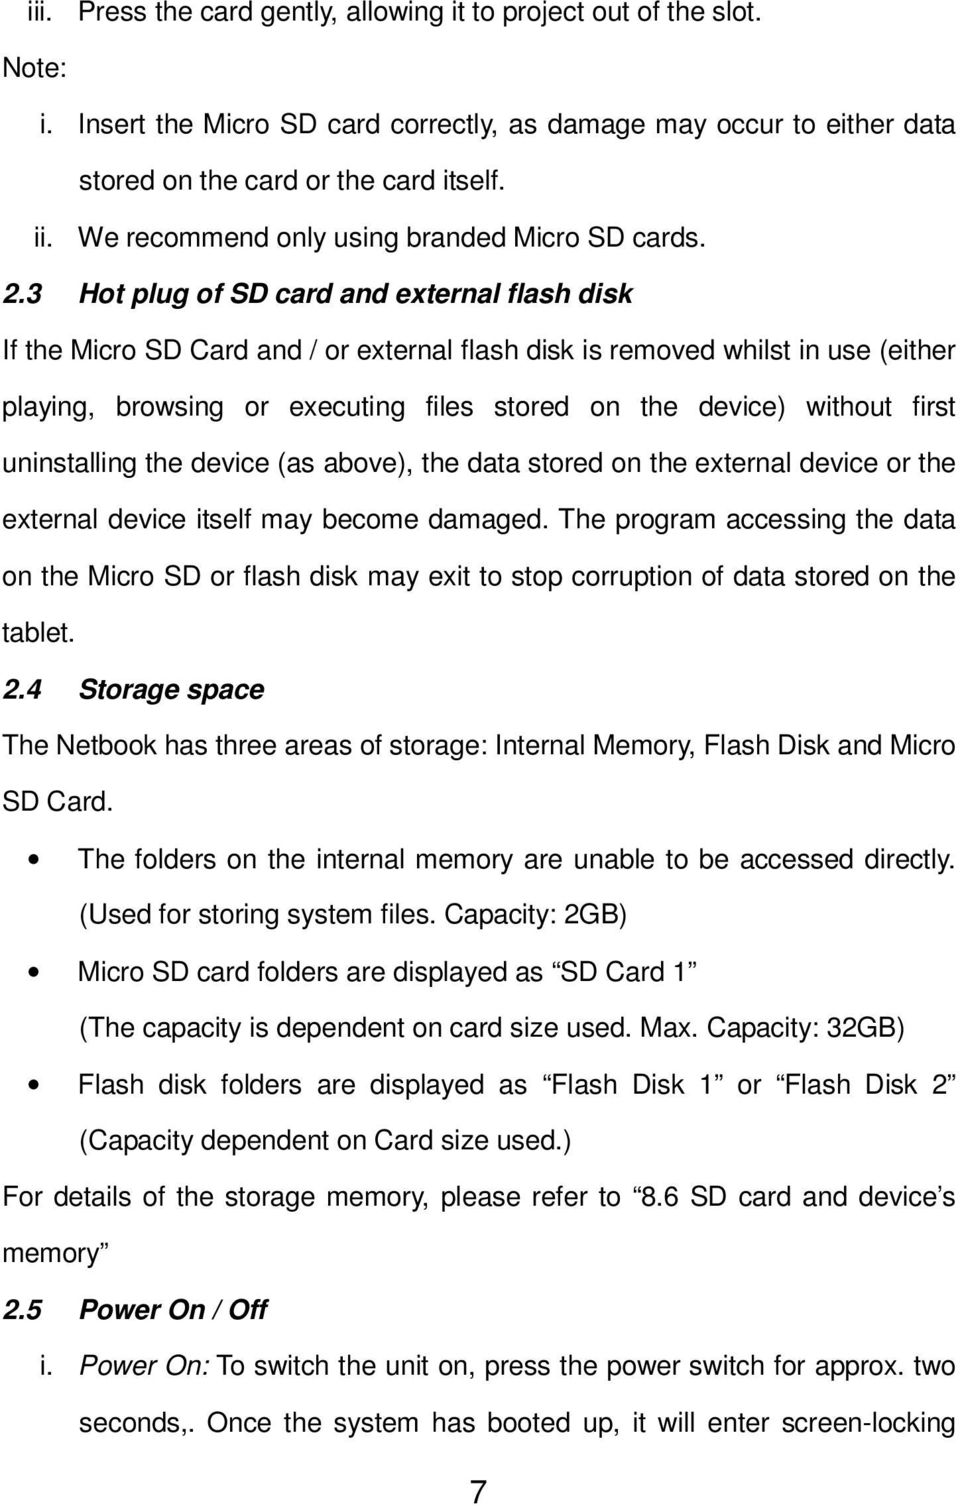 3 Hot plug of SD card and external flash disk If the Micro SD Card and / or external flash disk is removed whilst in use (either playing, browsing or executing files stored on the device) without